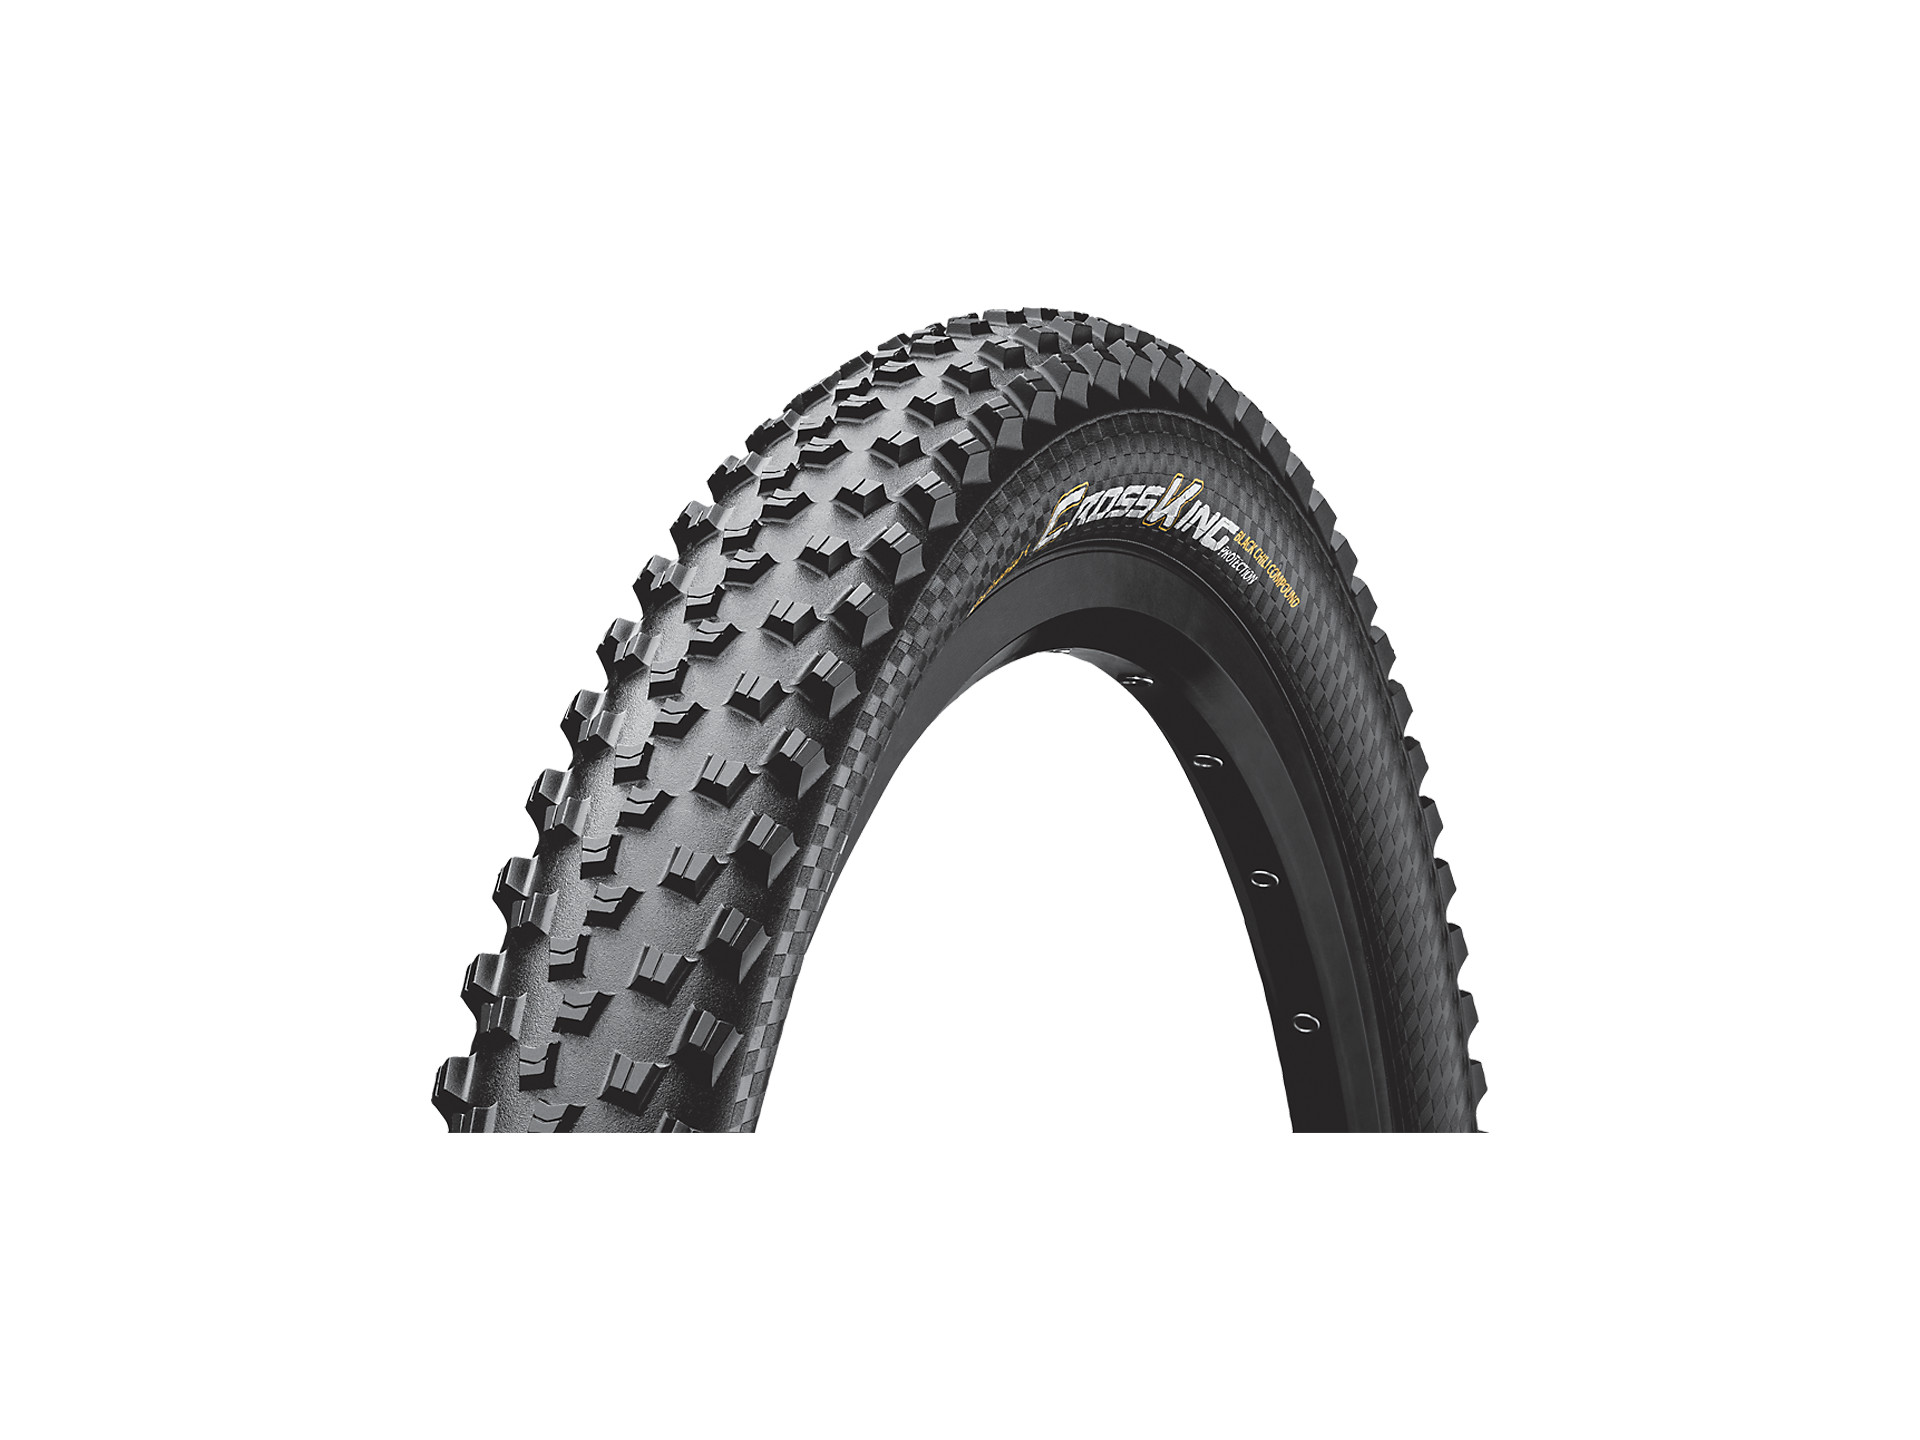 Details about   Bontrager SE4 Team Issue Tubeless Ready MTB Mountain Bike Tire 29 x 2.4 